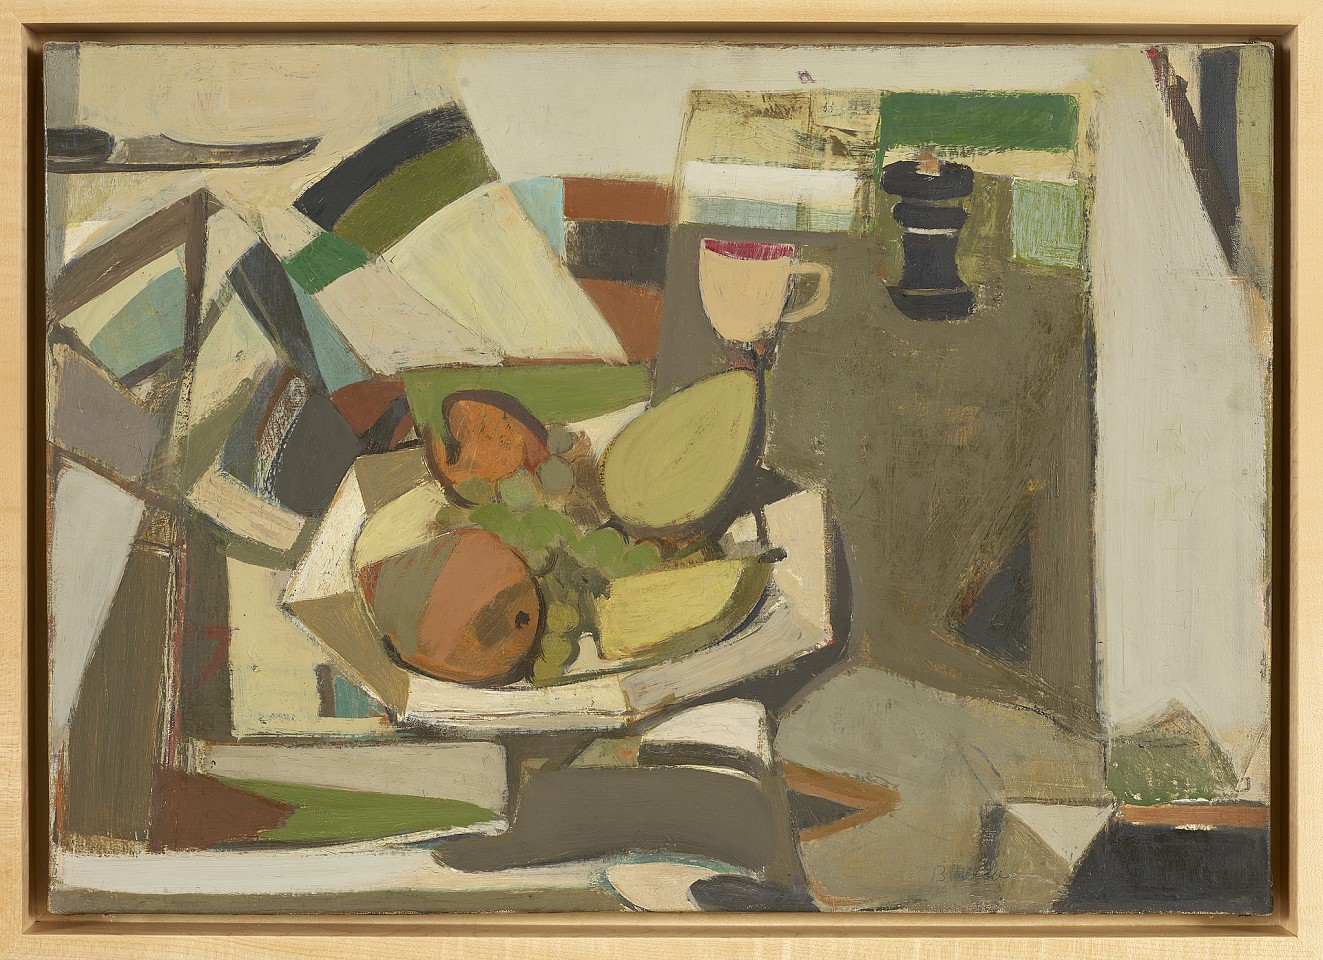 Janice Biala, Nature morte aux poires (Still Life with Pears), c. 1950
Oil on canvas, 16 1/8 x 22 3/4 in. (41 x 57.8 cm)
BIAL-00028